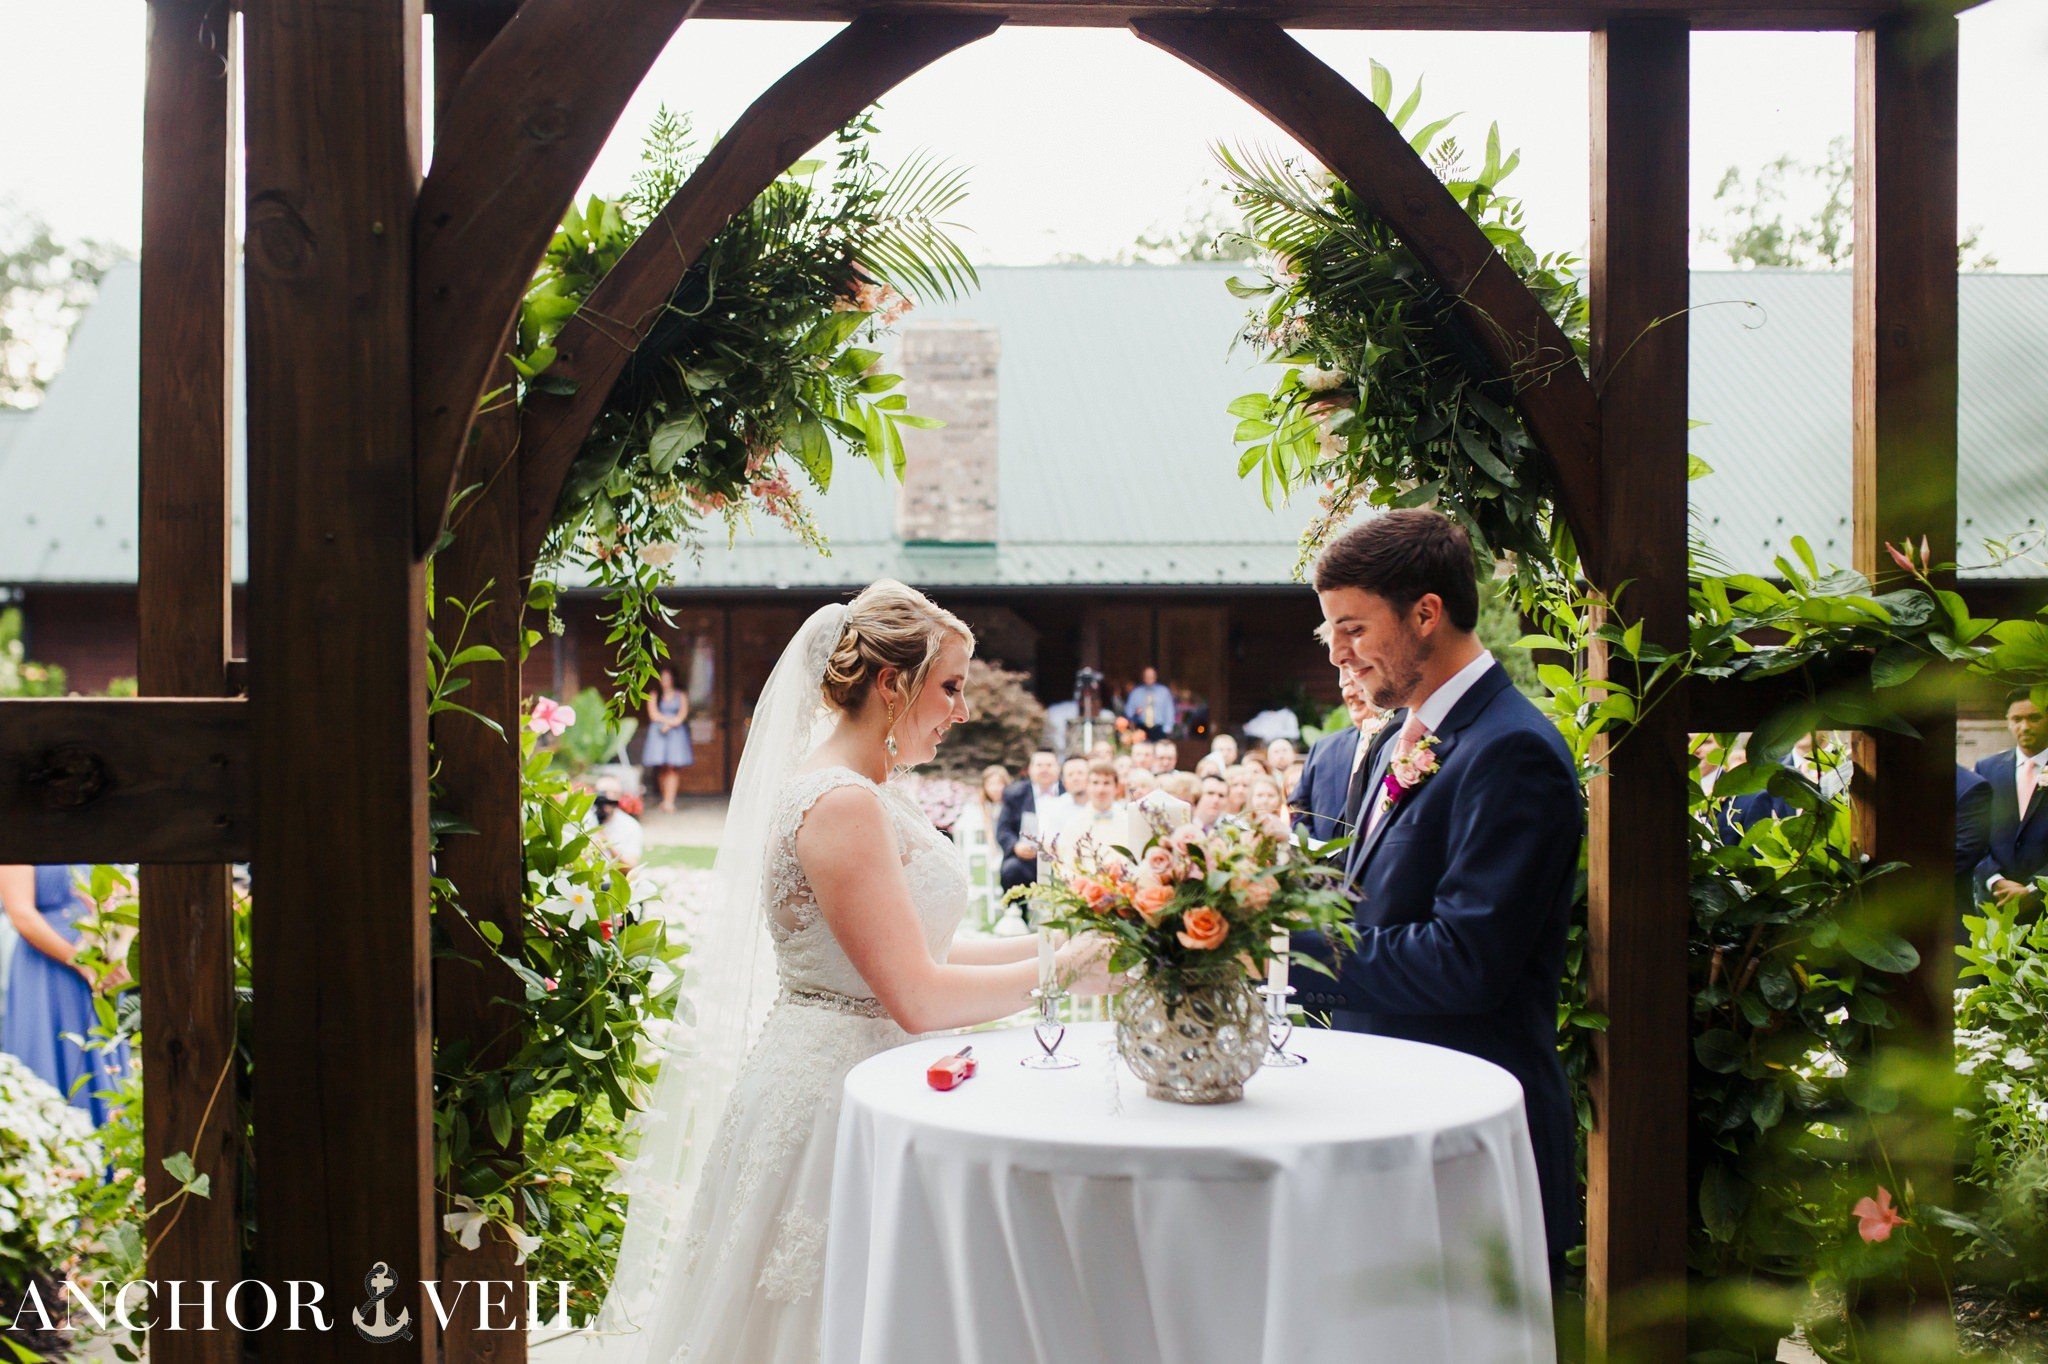 Tying the knot during their rolling Hill Farms Wedding ceremony